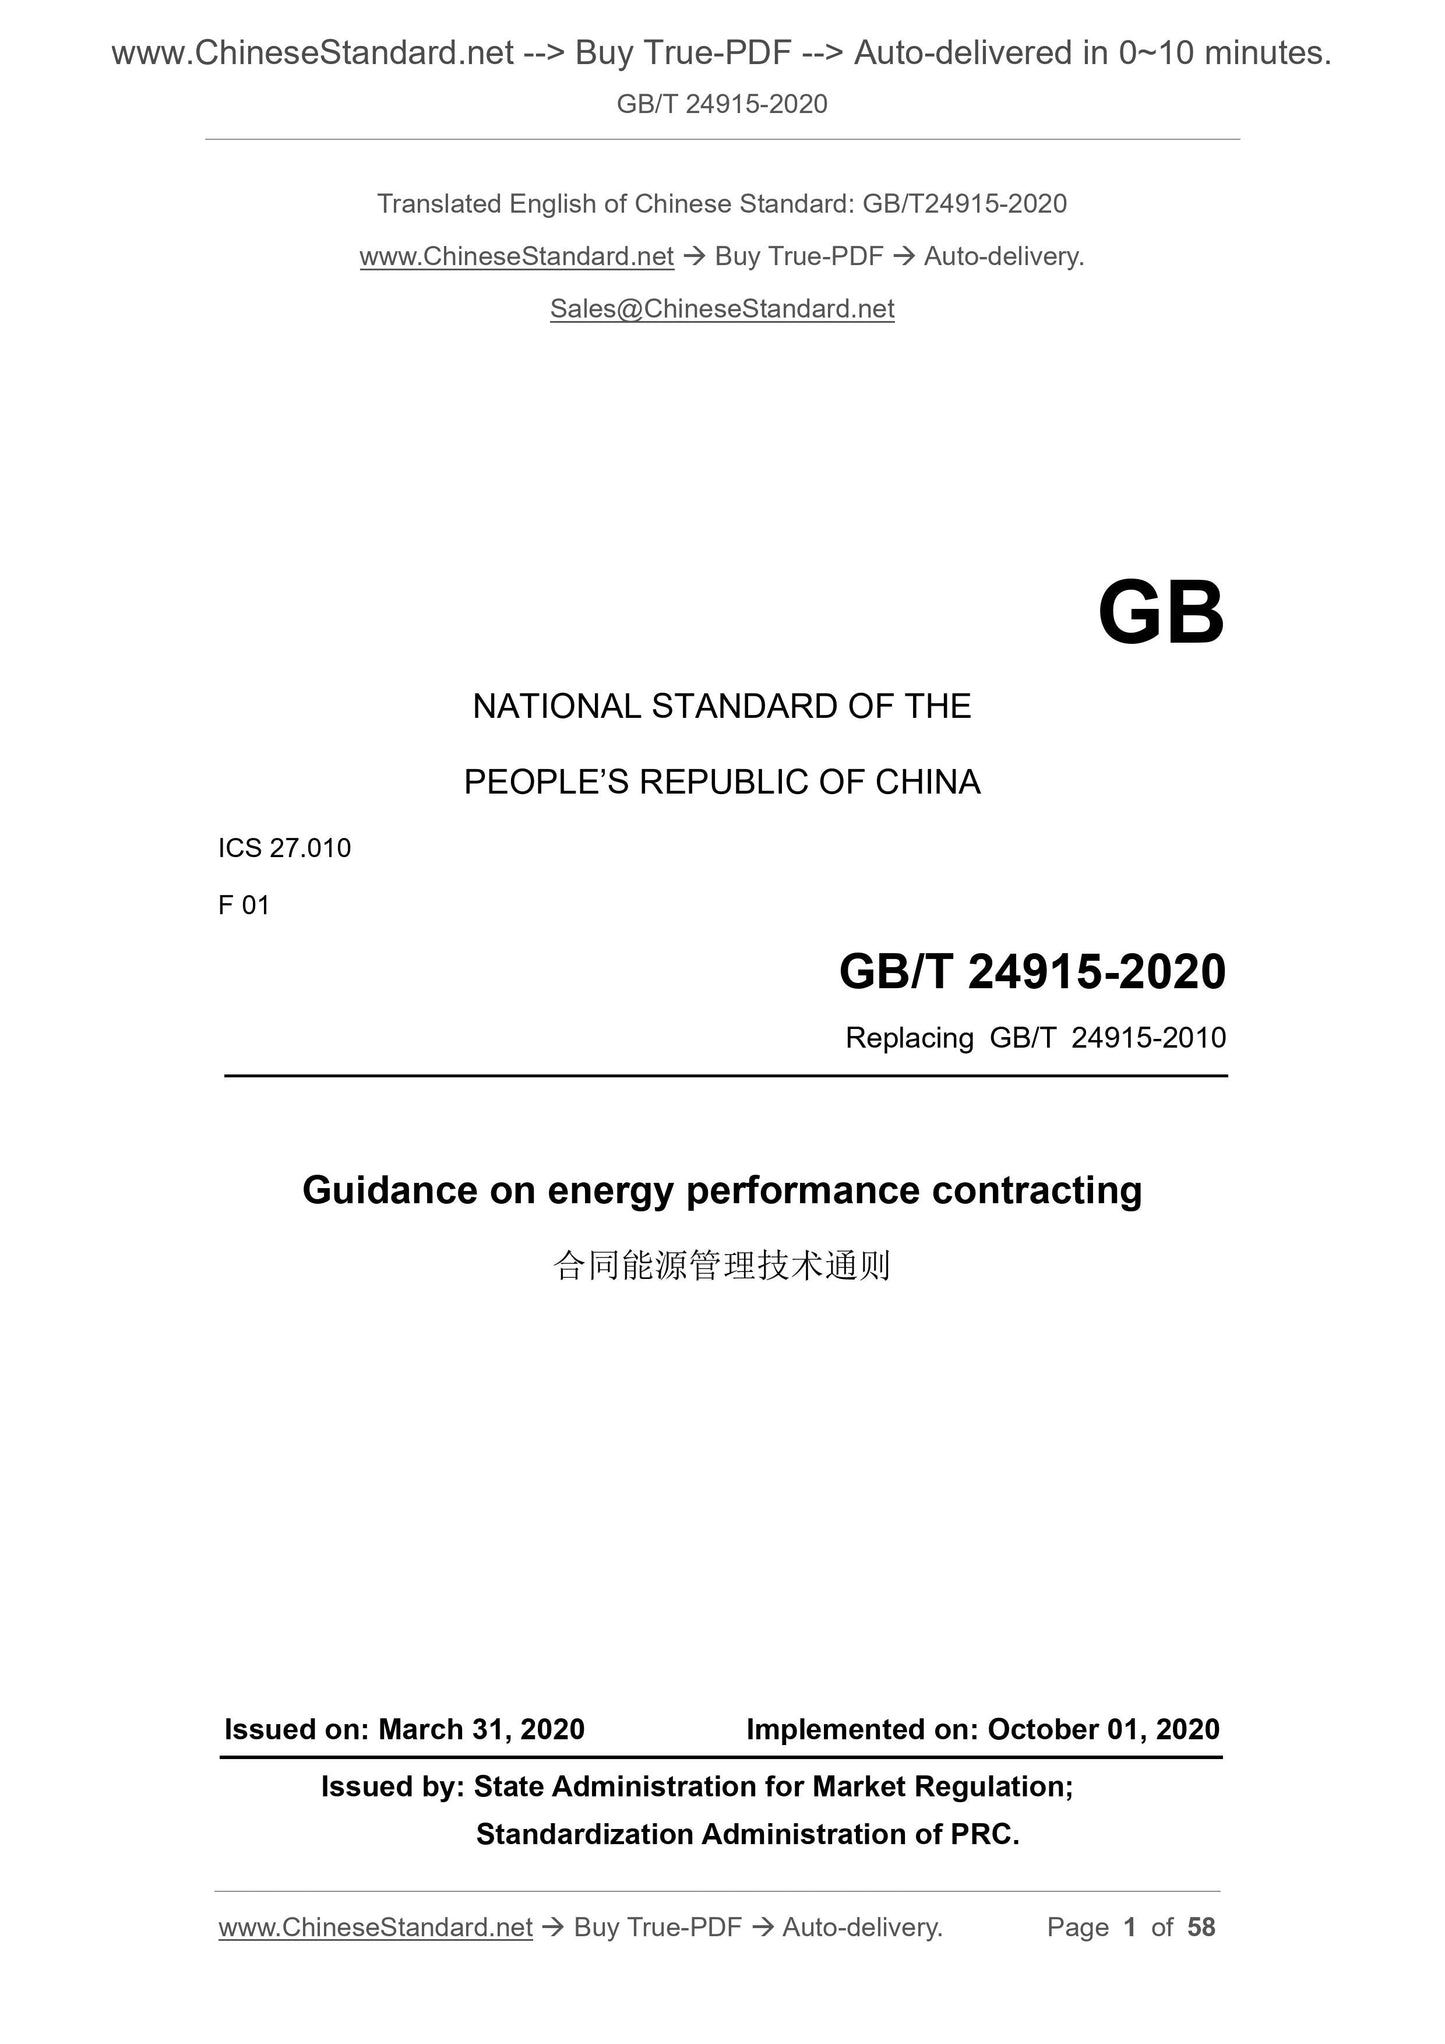 GB/T 24915-2020 Page 1